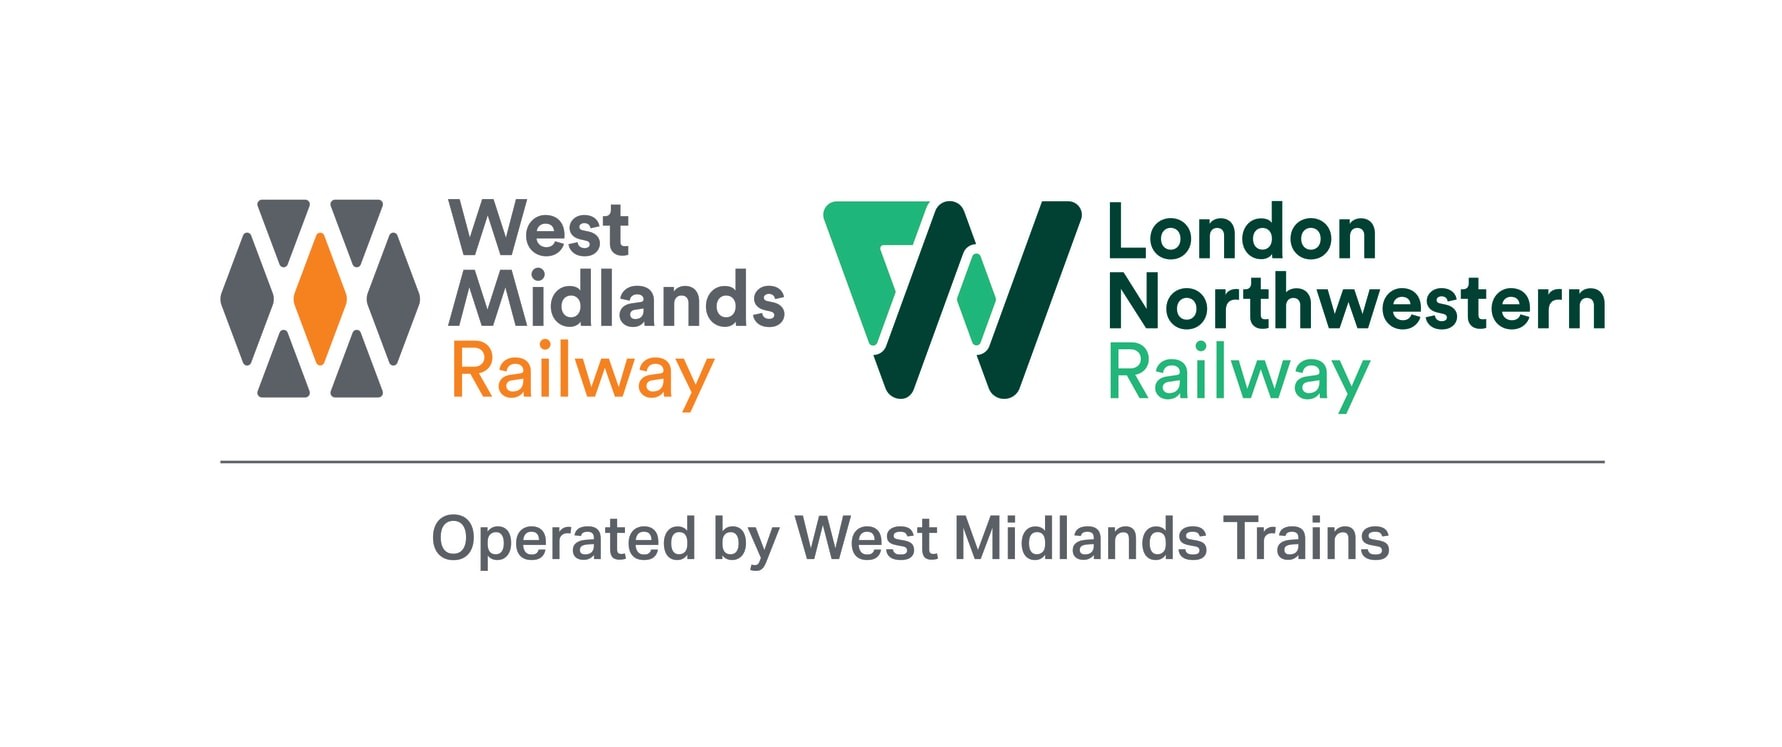 West Midlands Trains hailed for commitment to diversity and inclusion